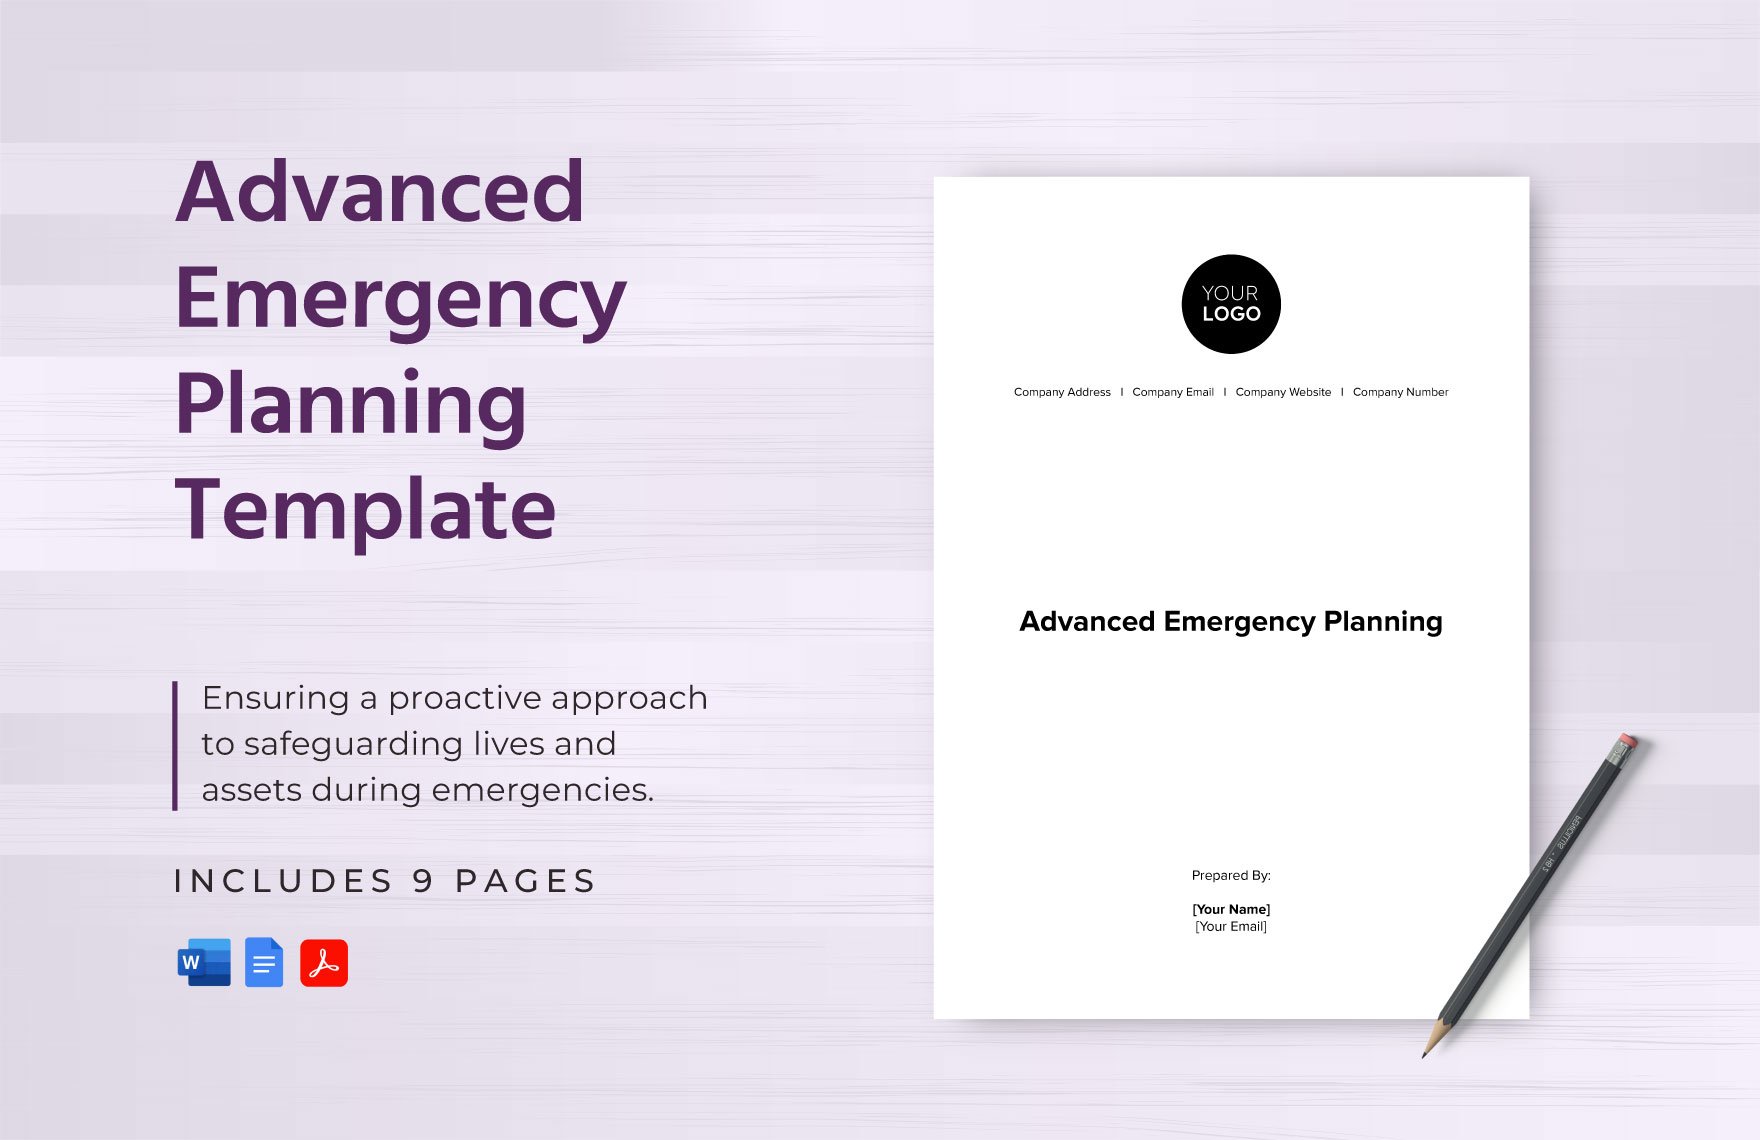 Advanced Emergency Planning Template